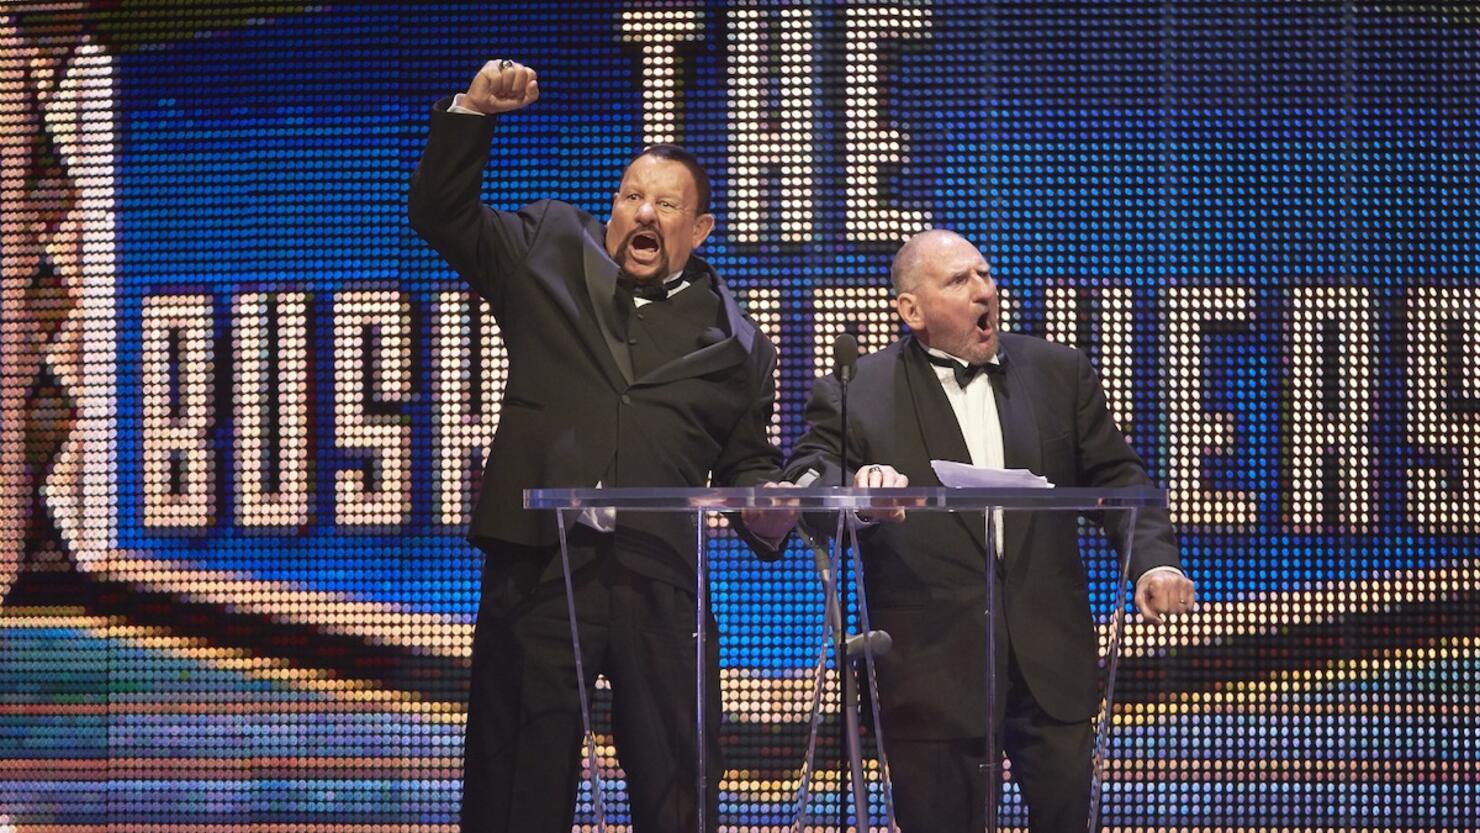 2015 WWE Hall of Fame Induction Ceremony